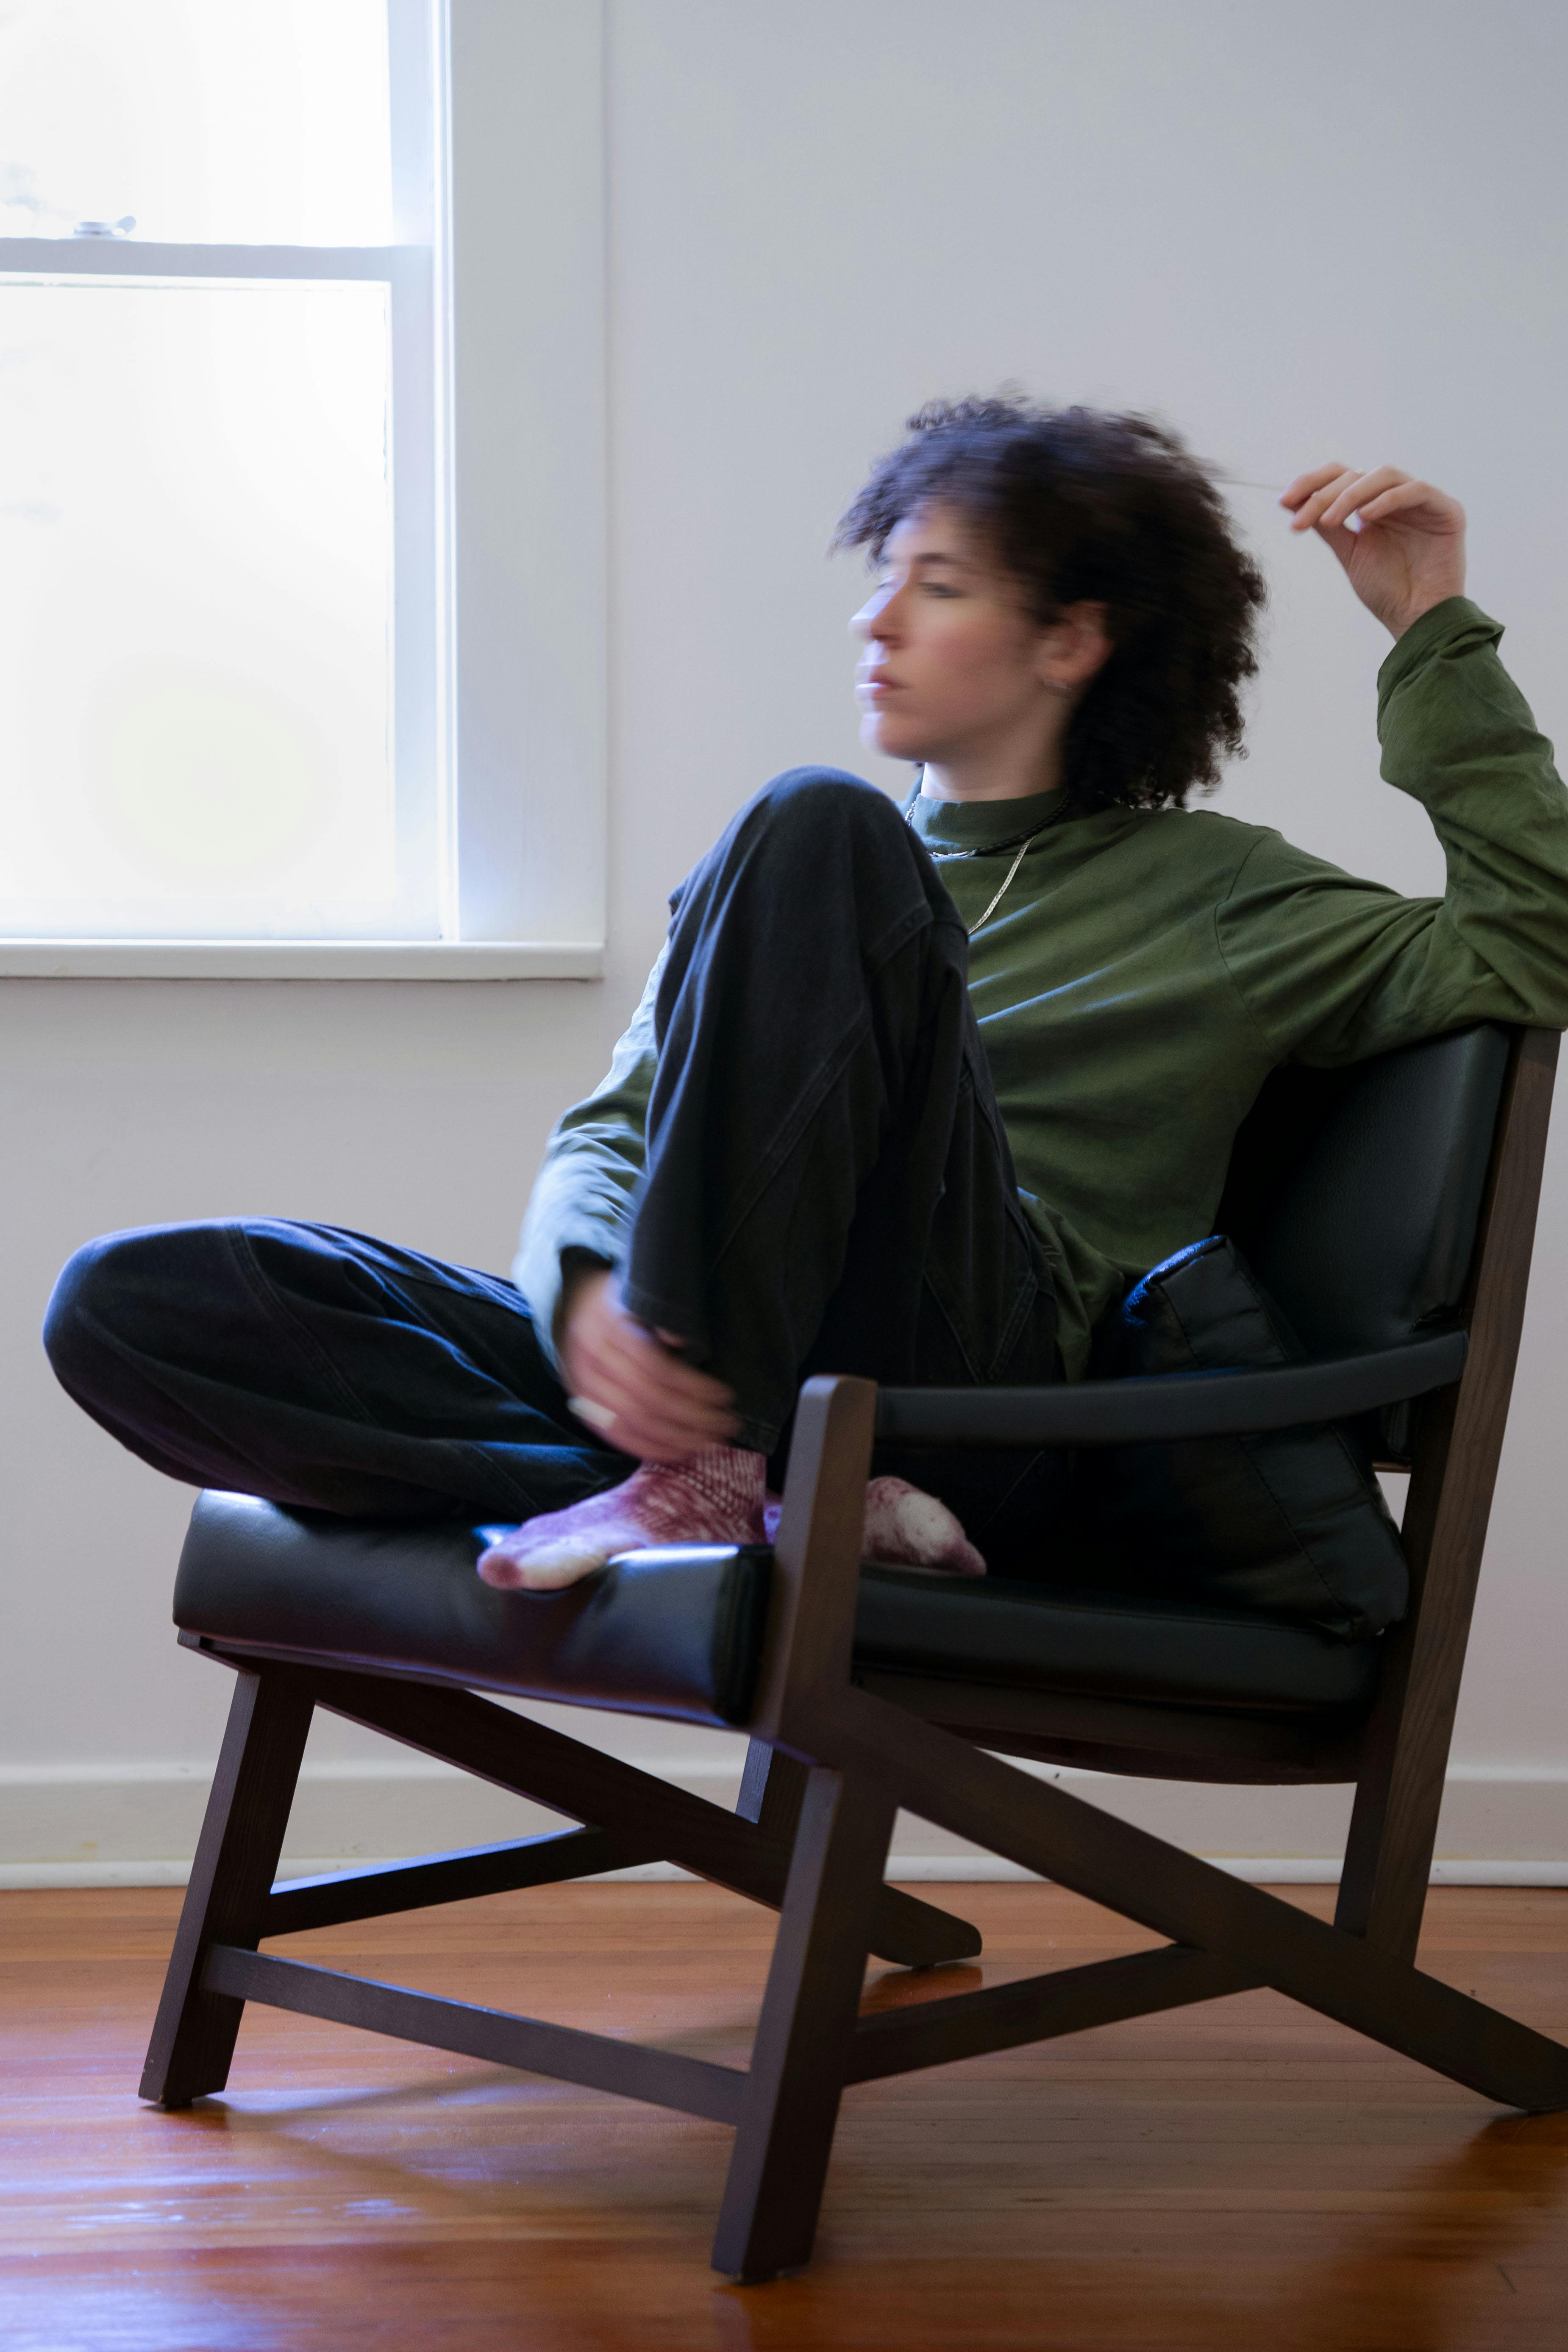 A photo of Dana Qaddah. Dana is seated in a chair wearing a green shirt and black pants. One of their arms is resting on the back of the chair.